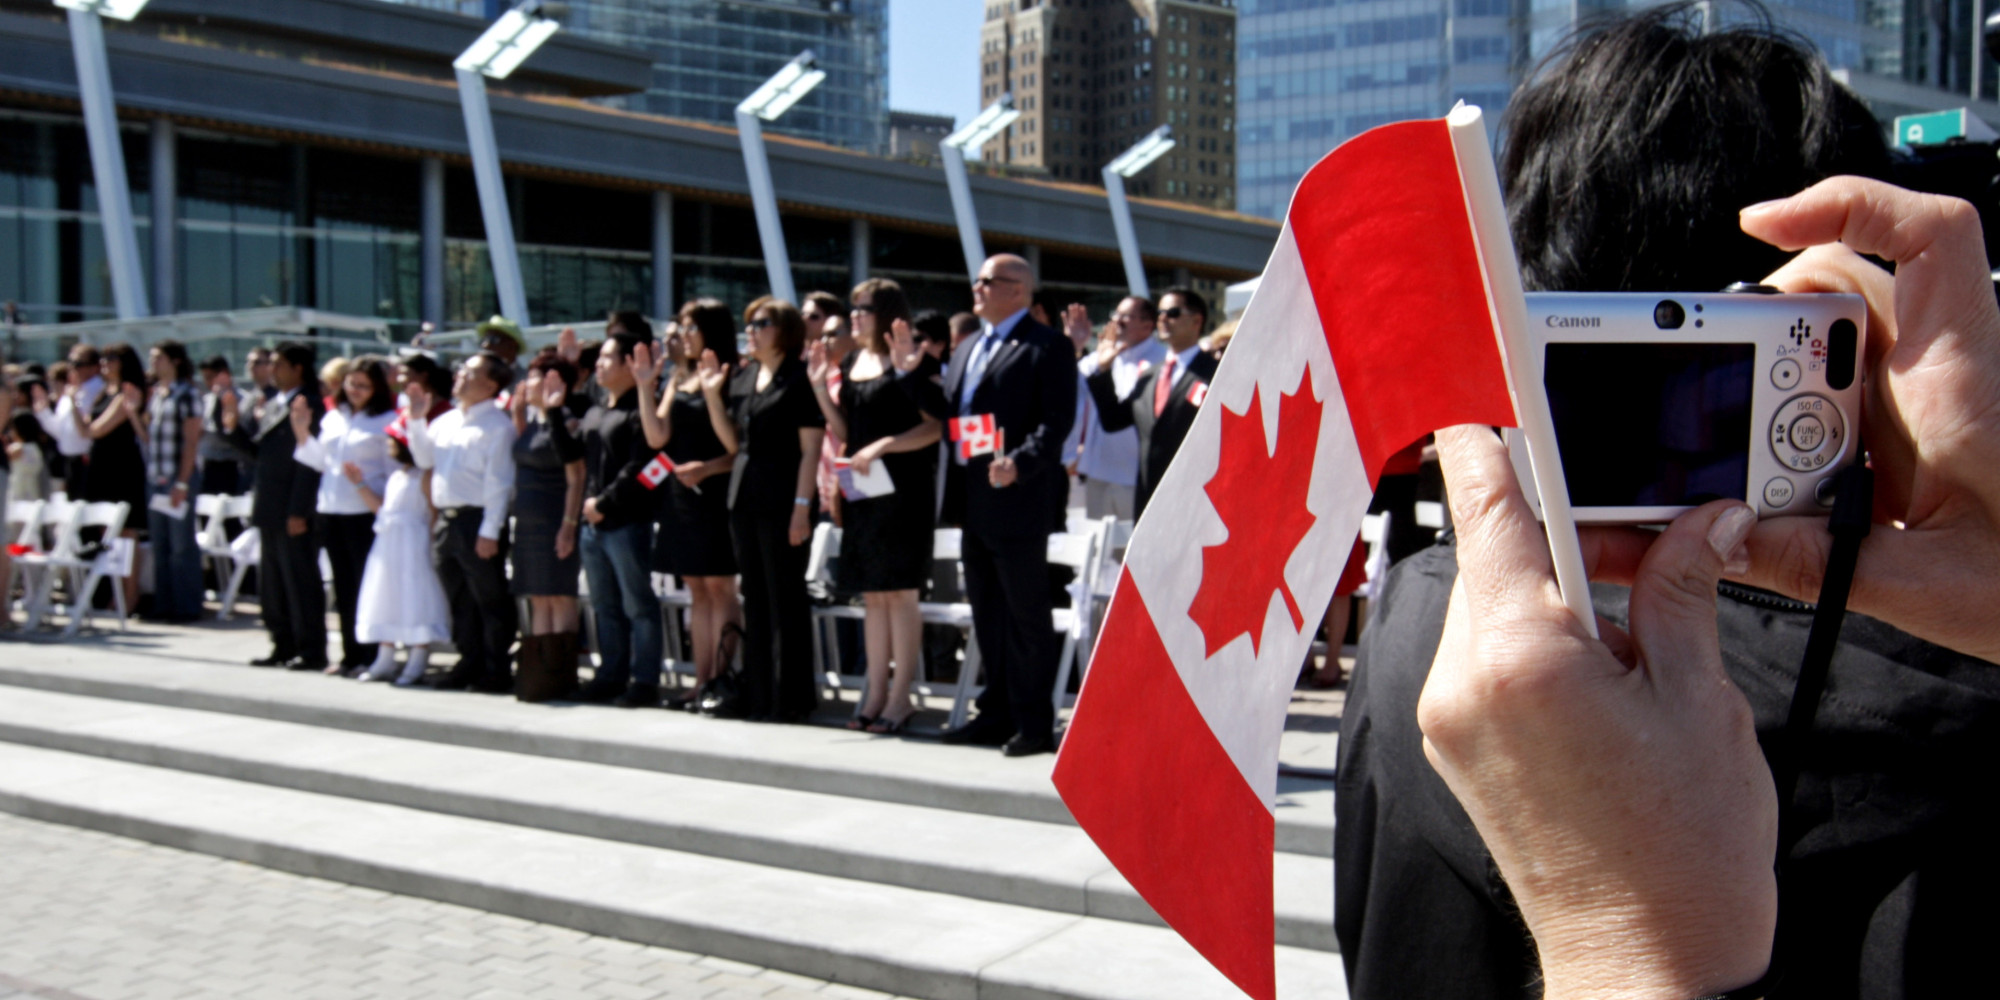 Could You Pass Canada's Citizenship Test?